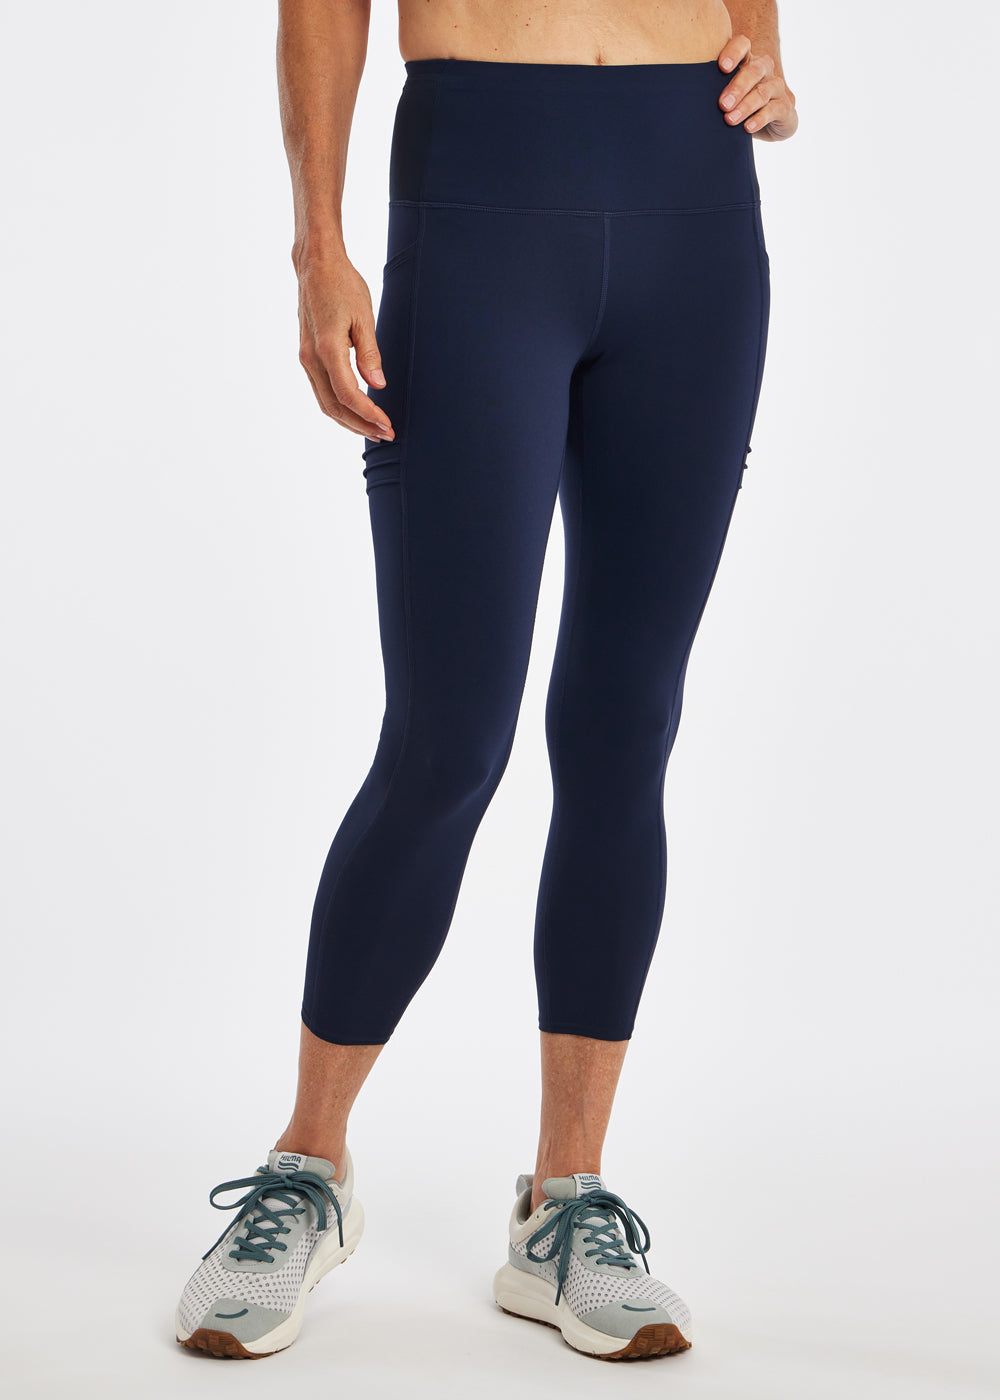 The Gym People, Pants & Jumpsuits, The Gym People Thick High Waist Yoga  Pants With Pockets Tummy Control M